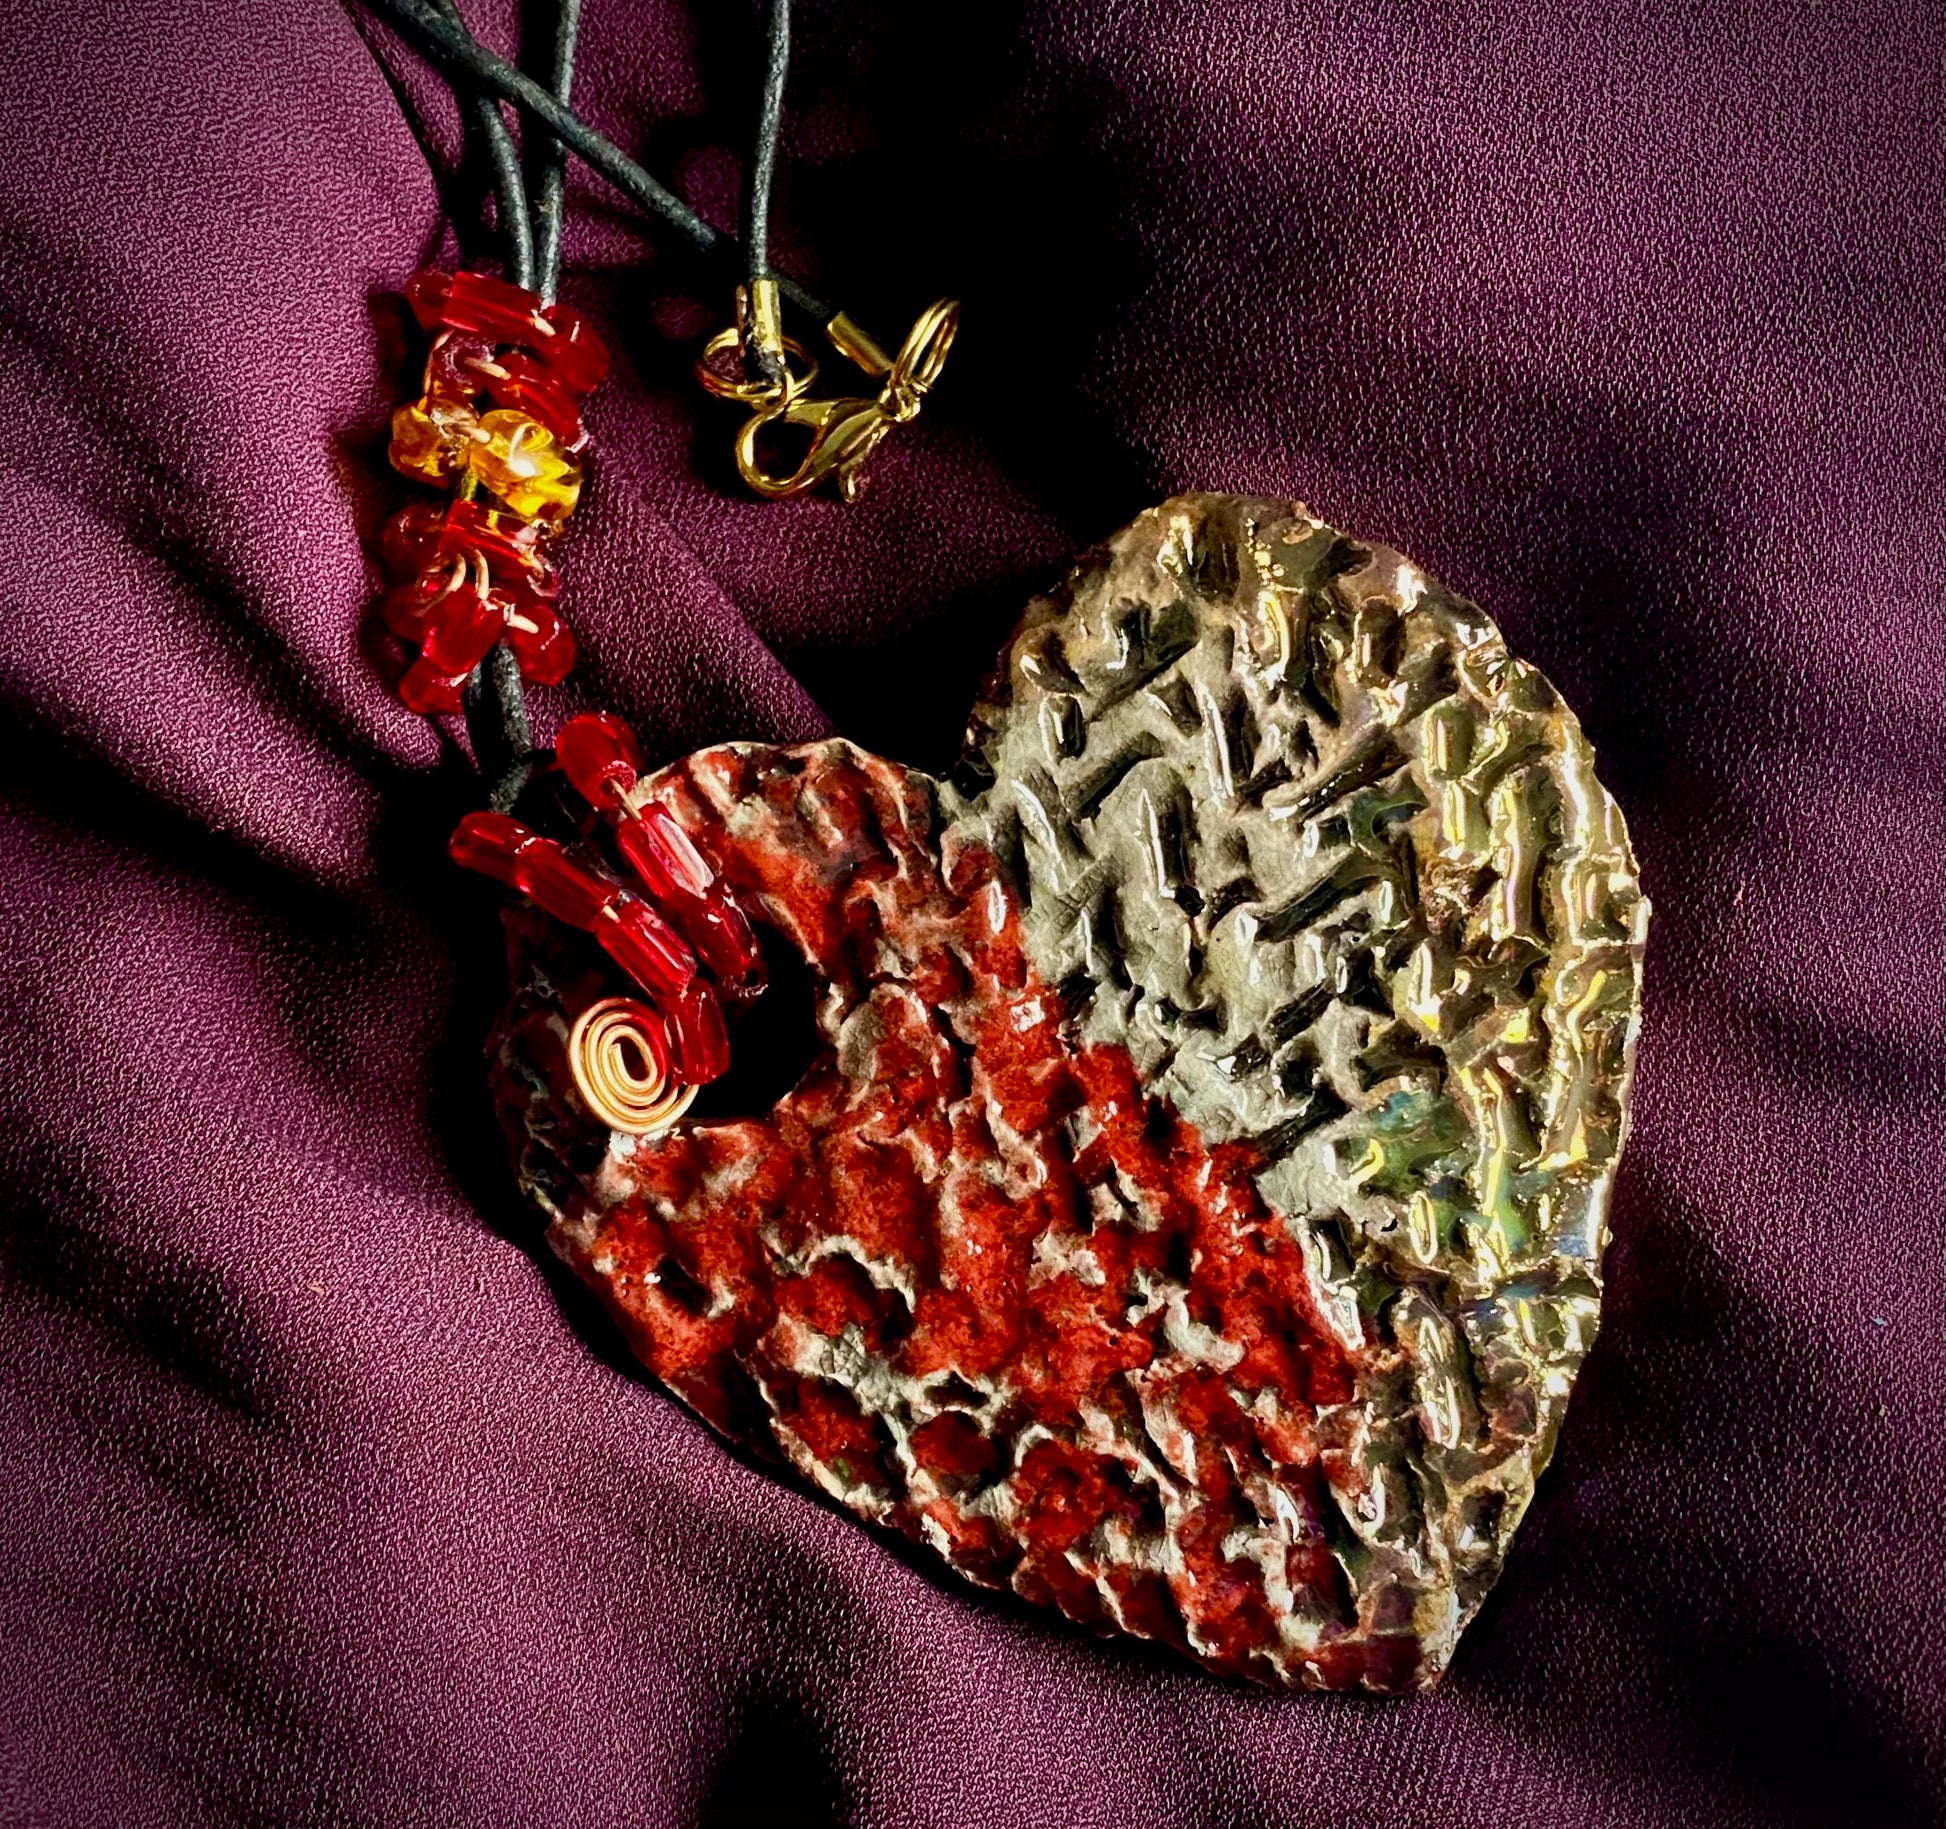 Have A Heart ! Each heart pendant is handmade with love! It is 3"x 3" and weighs approx. 3ozs. This pendant has a  ruby red and off white metallic raku glazes that renders a unique translucent  patina. The heart  has a textured  pattern. It holds a spiral of ruby red mini beads on a spiral copper wire. This pendant has a nice 12" black suede cord!